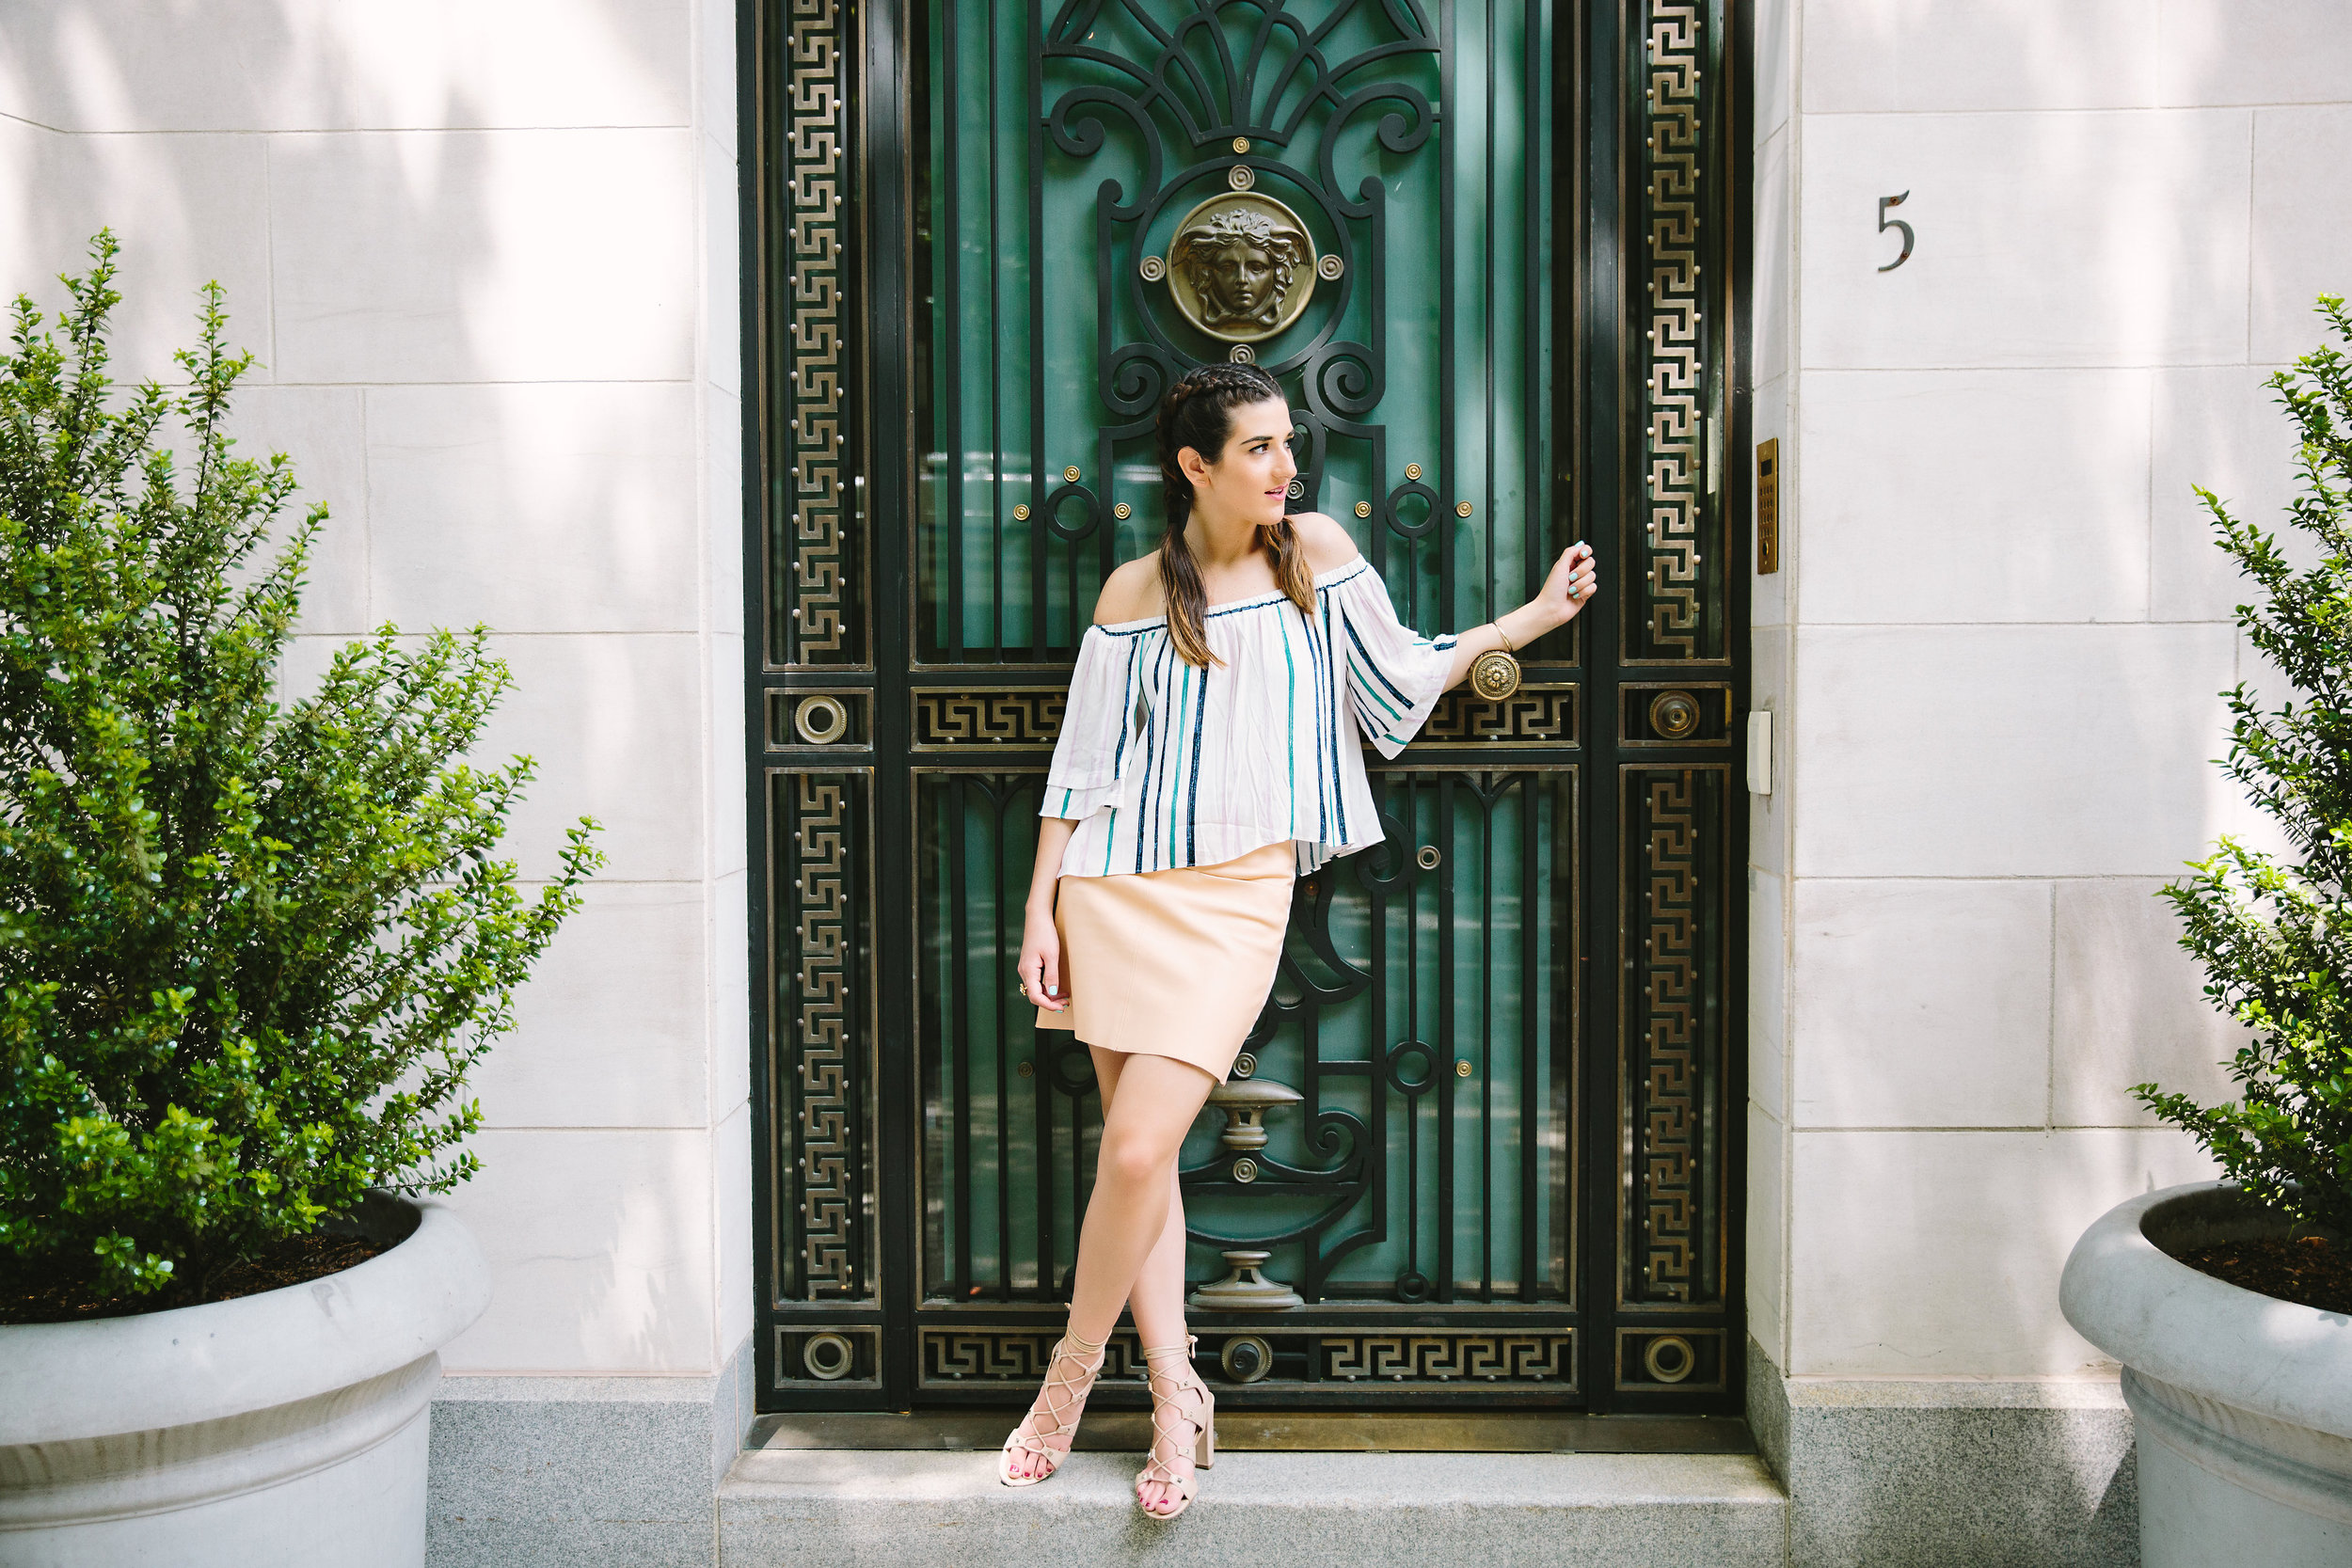 Striped Off-The-Shoulder Shoulder Top Shop Trescool Louboutins & Love Fashion Blog Esther Santer NYC Street Style Blogger Outfit OOTD Mini Skirt Pastel Pink Trendy Nude Lace Up Heels Ivanka Trump Gold Ring Hairstyle Boxer Braid Photoshoot Inspo Summer.jpg